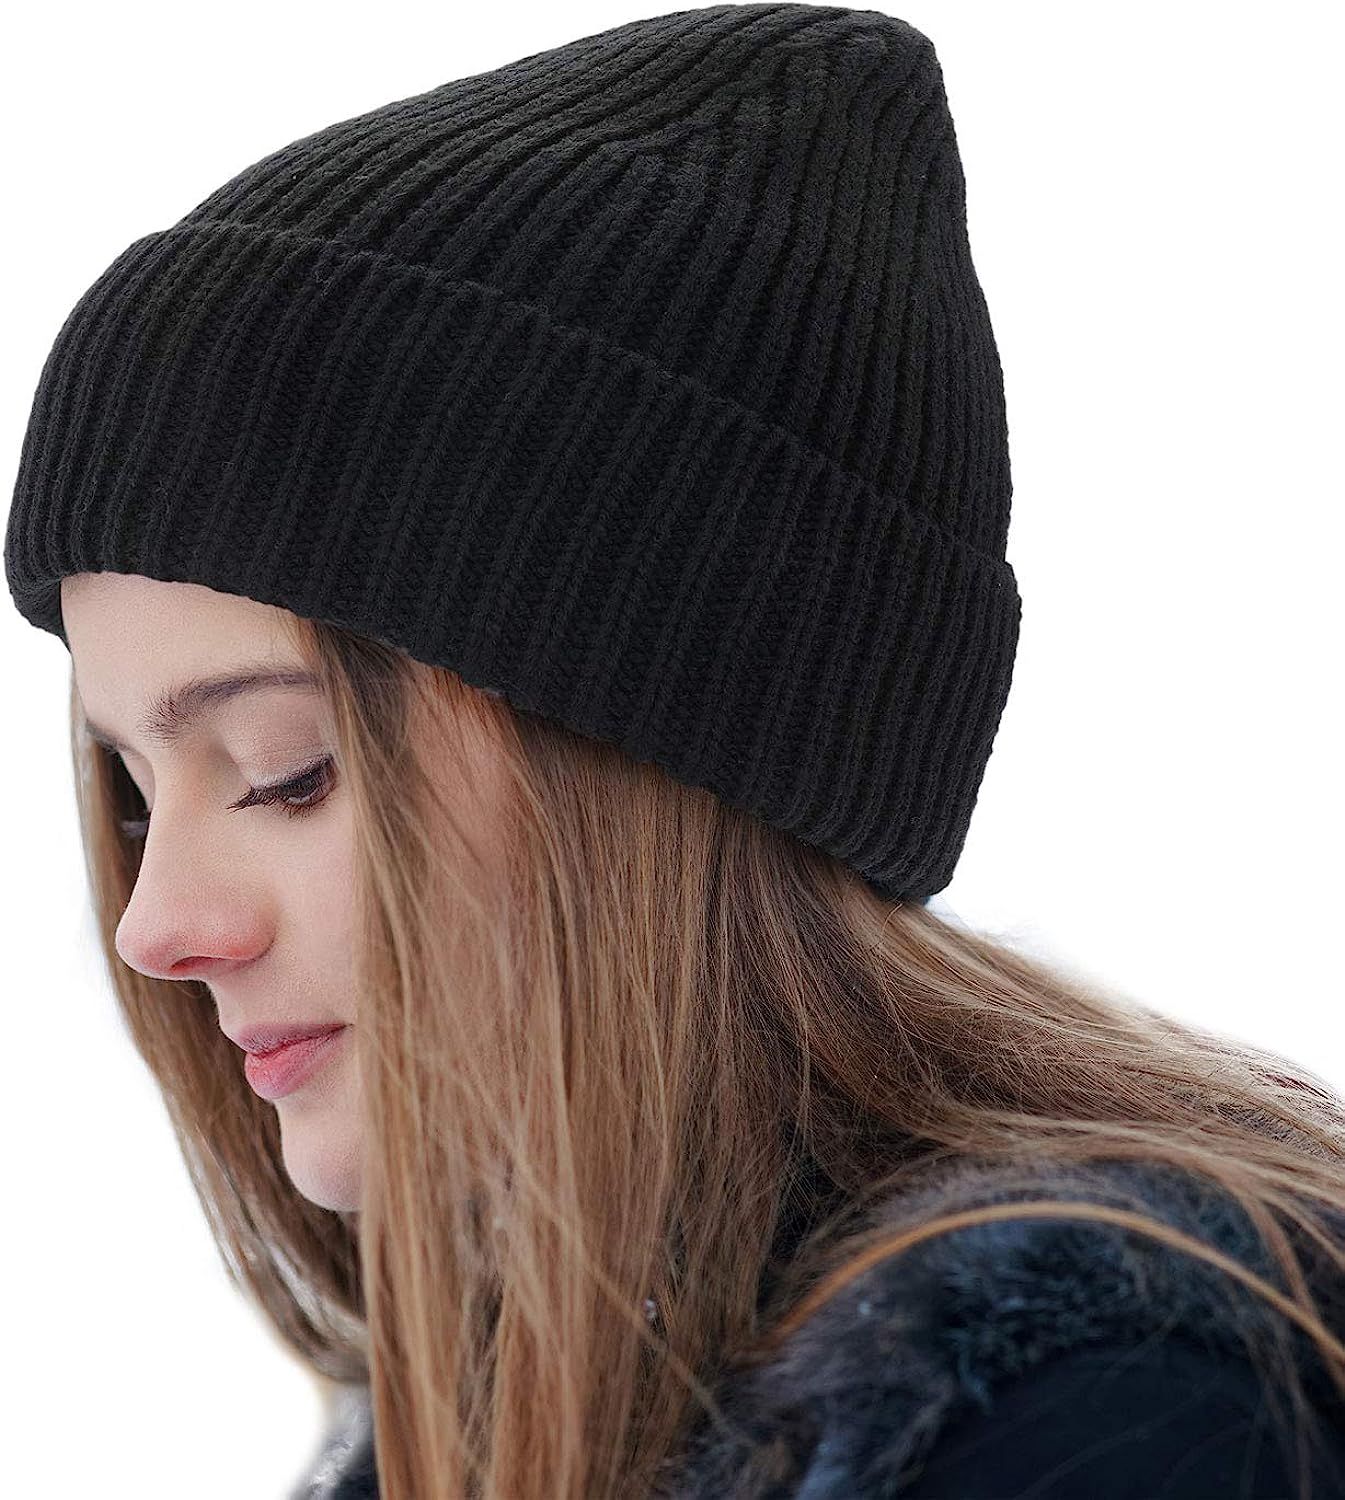 Feximzl Good Threads Beanie Hat Warm Knit Hat Thick Knit Skull Cap for Men Women | Amazon (US)